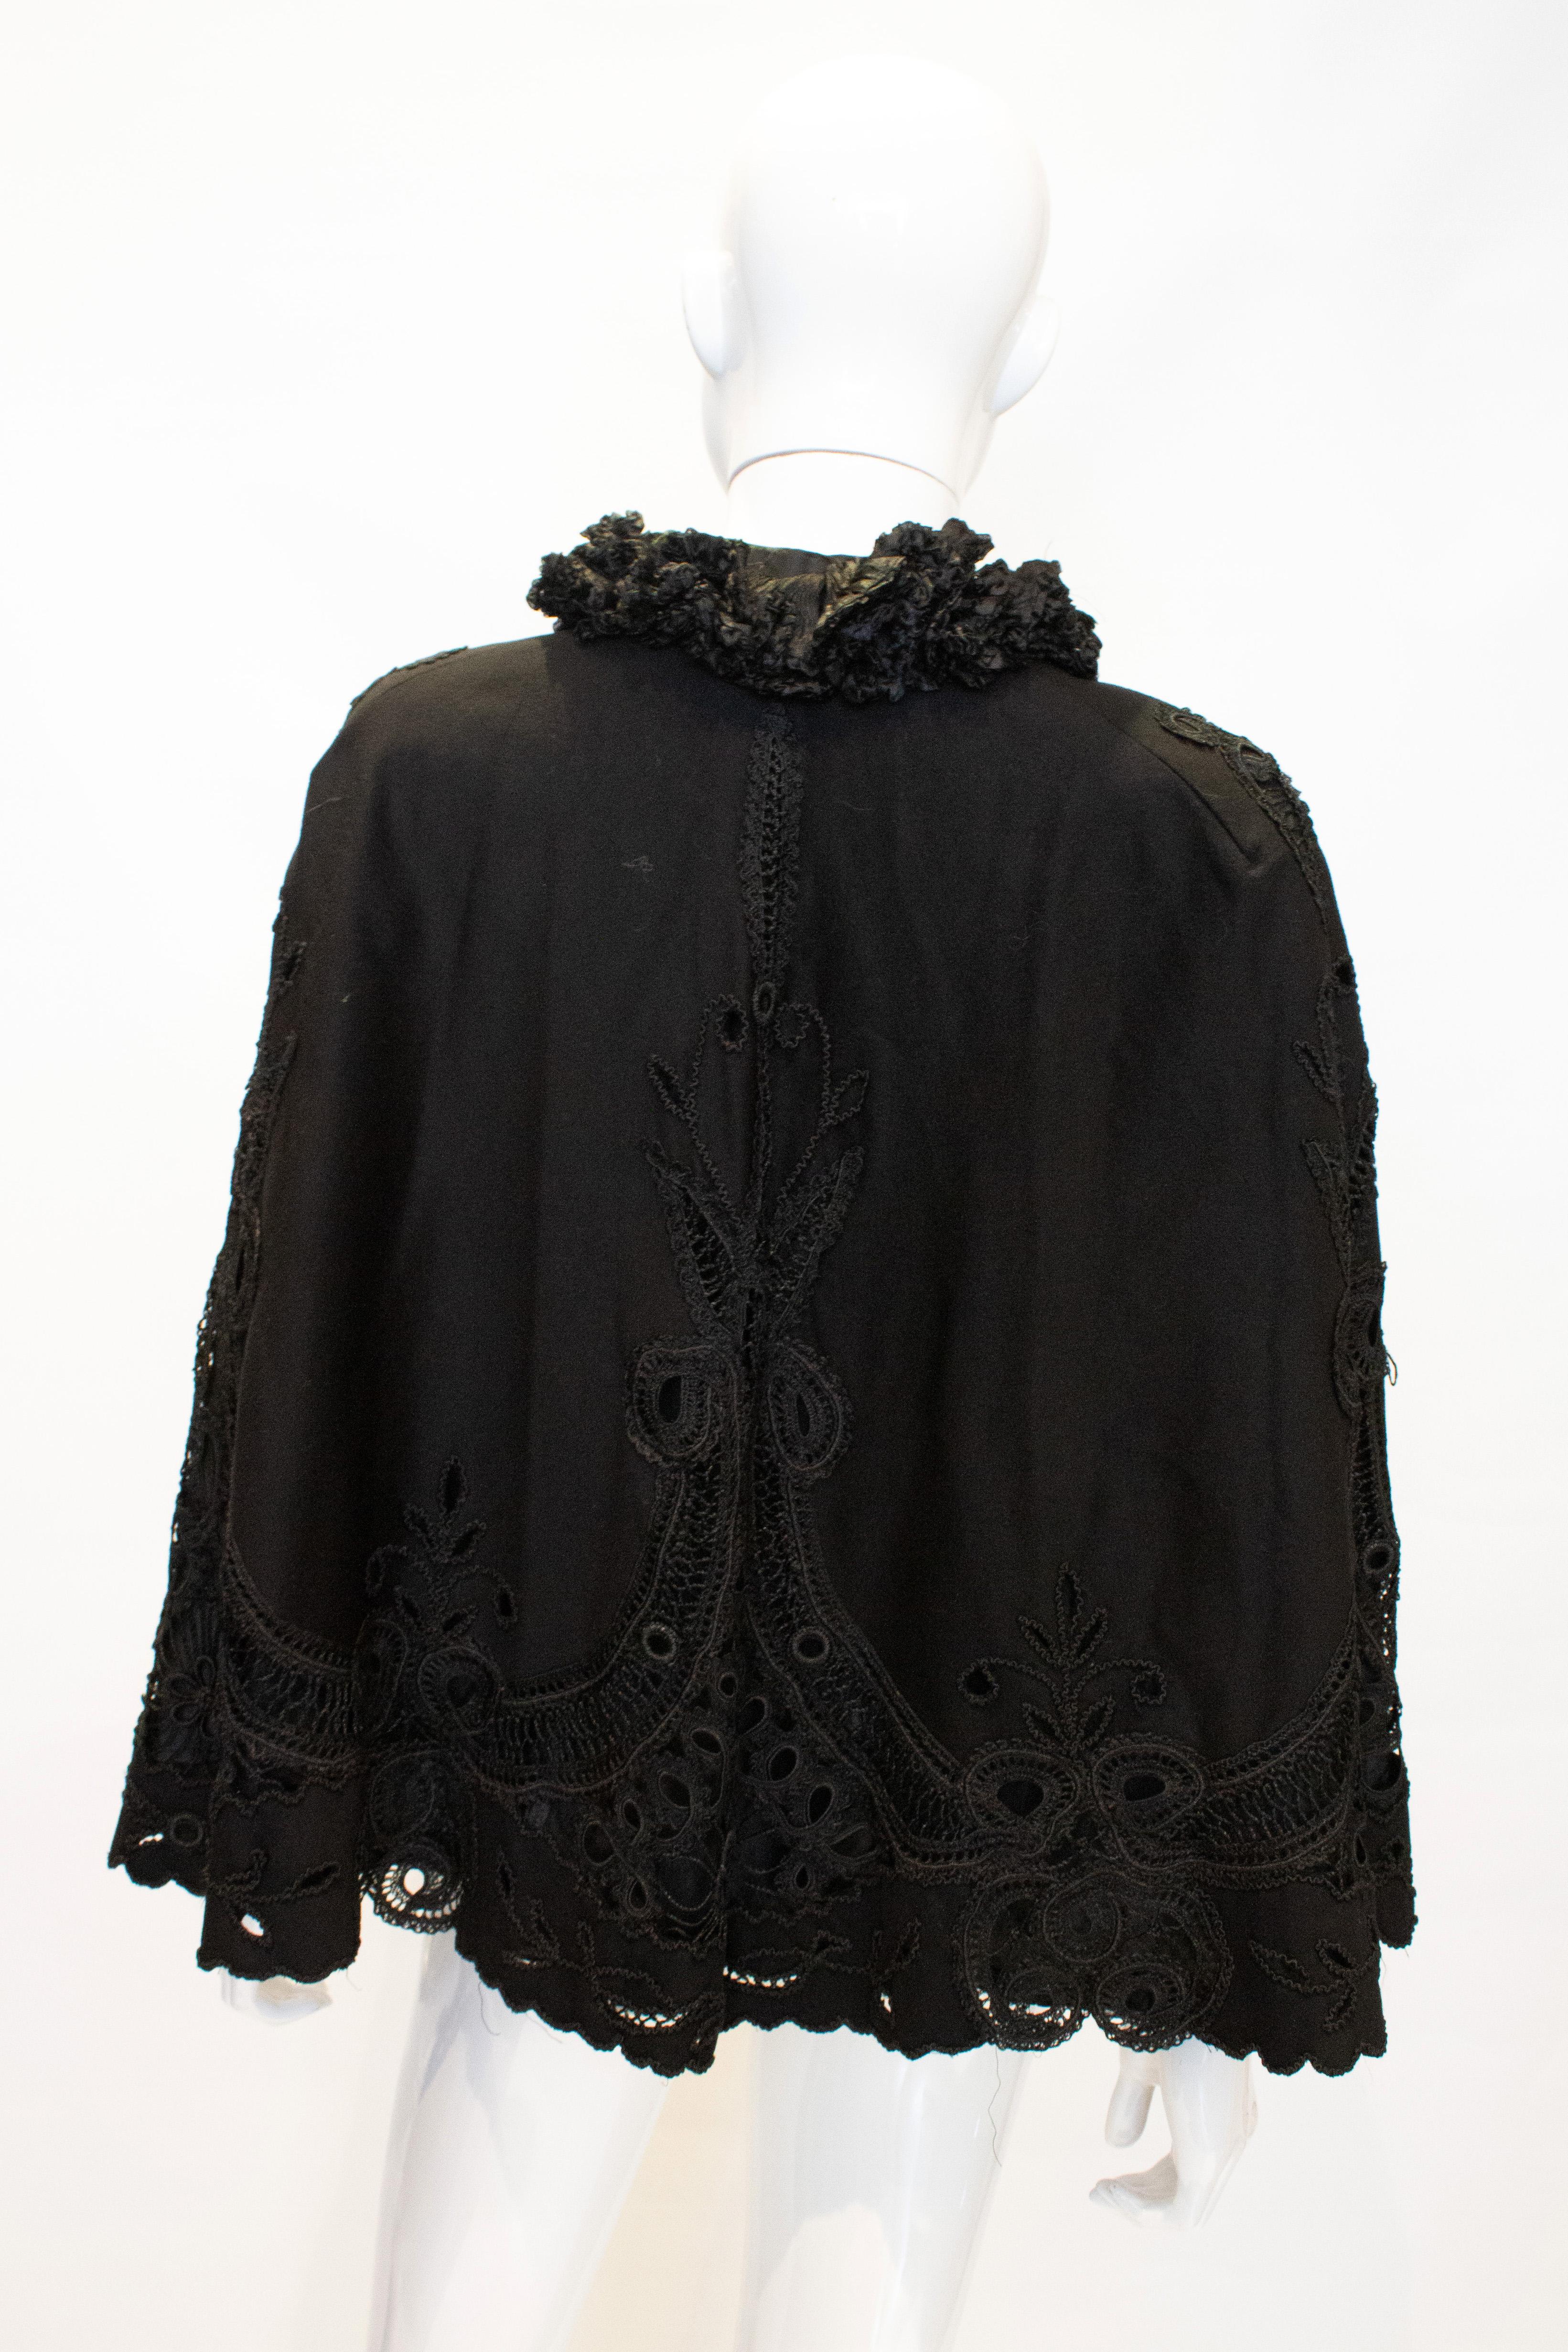 A chic vintage black cape with embroidery detail, and frill at the neck.  The cape is lined.
Measurements: Shoulder to shoulder 18'', ;length 25''